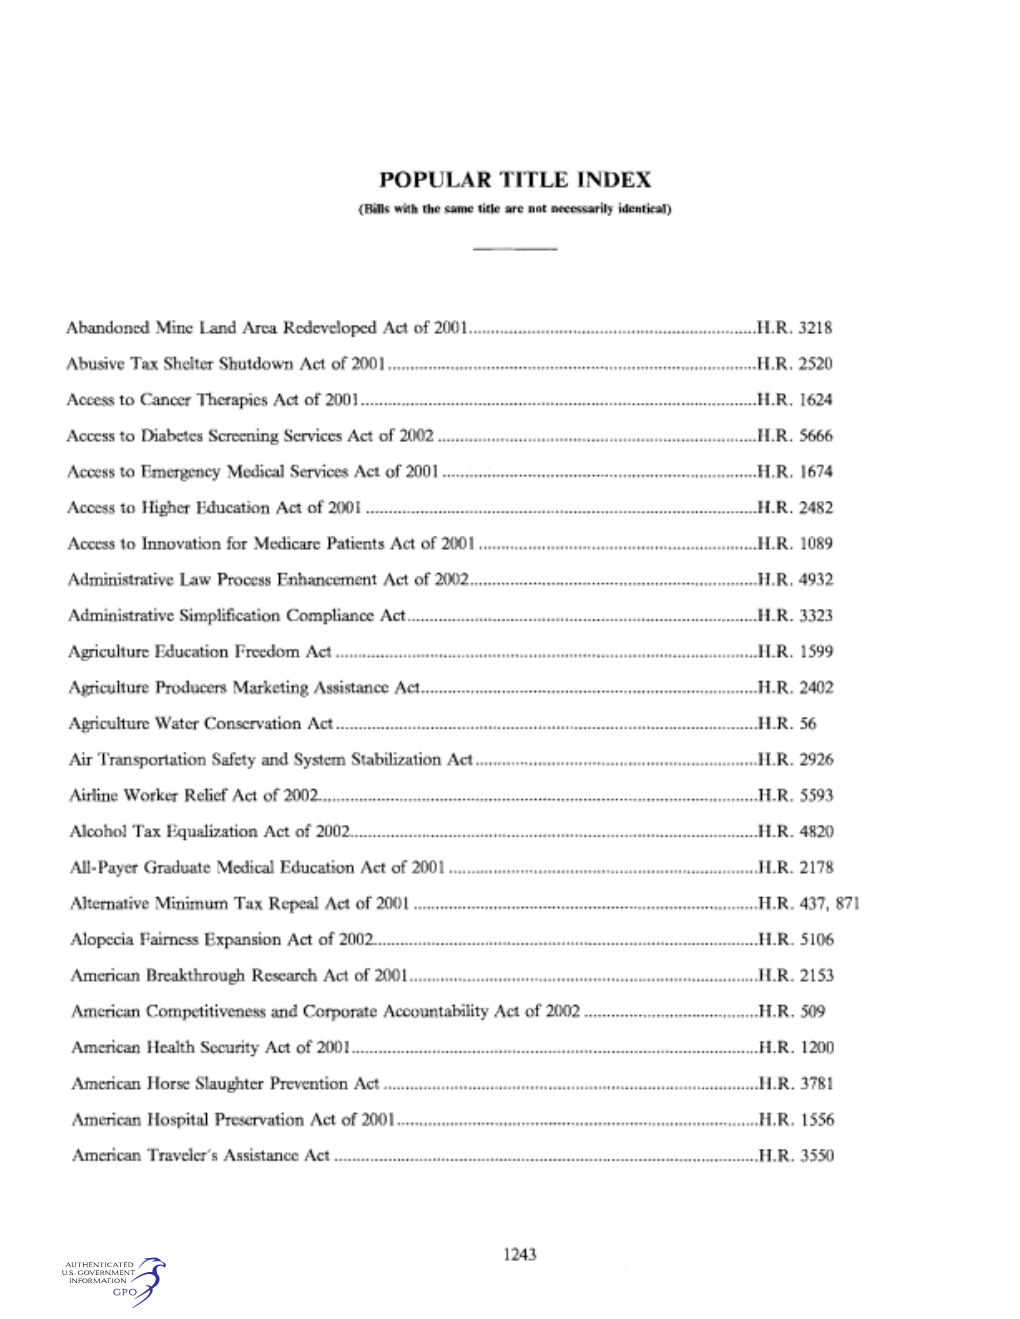 POPULAR TITLE INDEX (Bills with the Same Title Are Not Necessarily Identical)